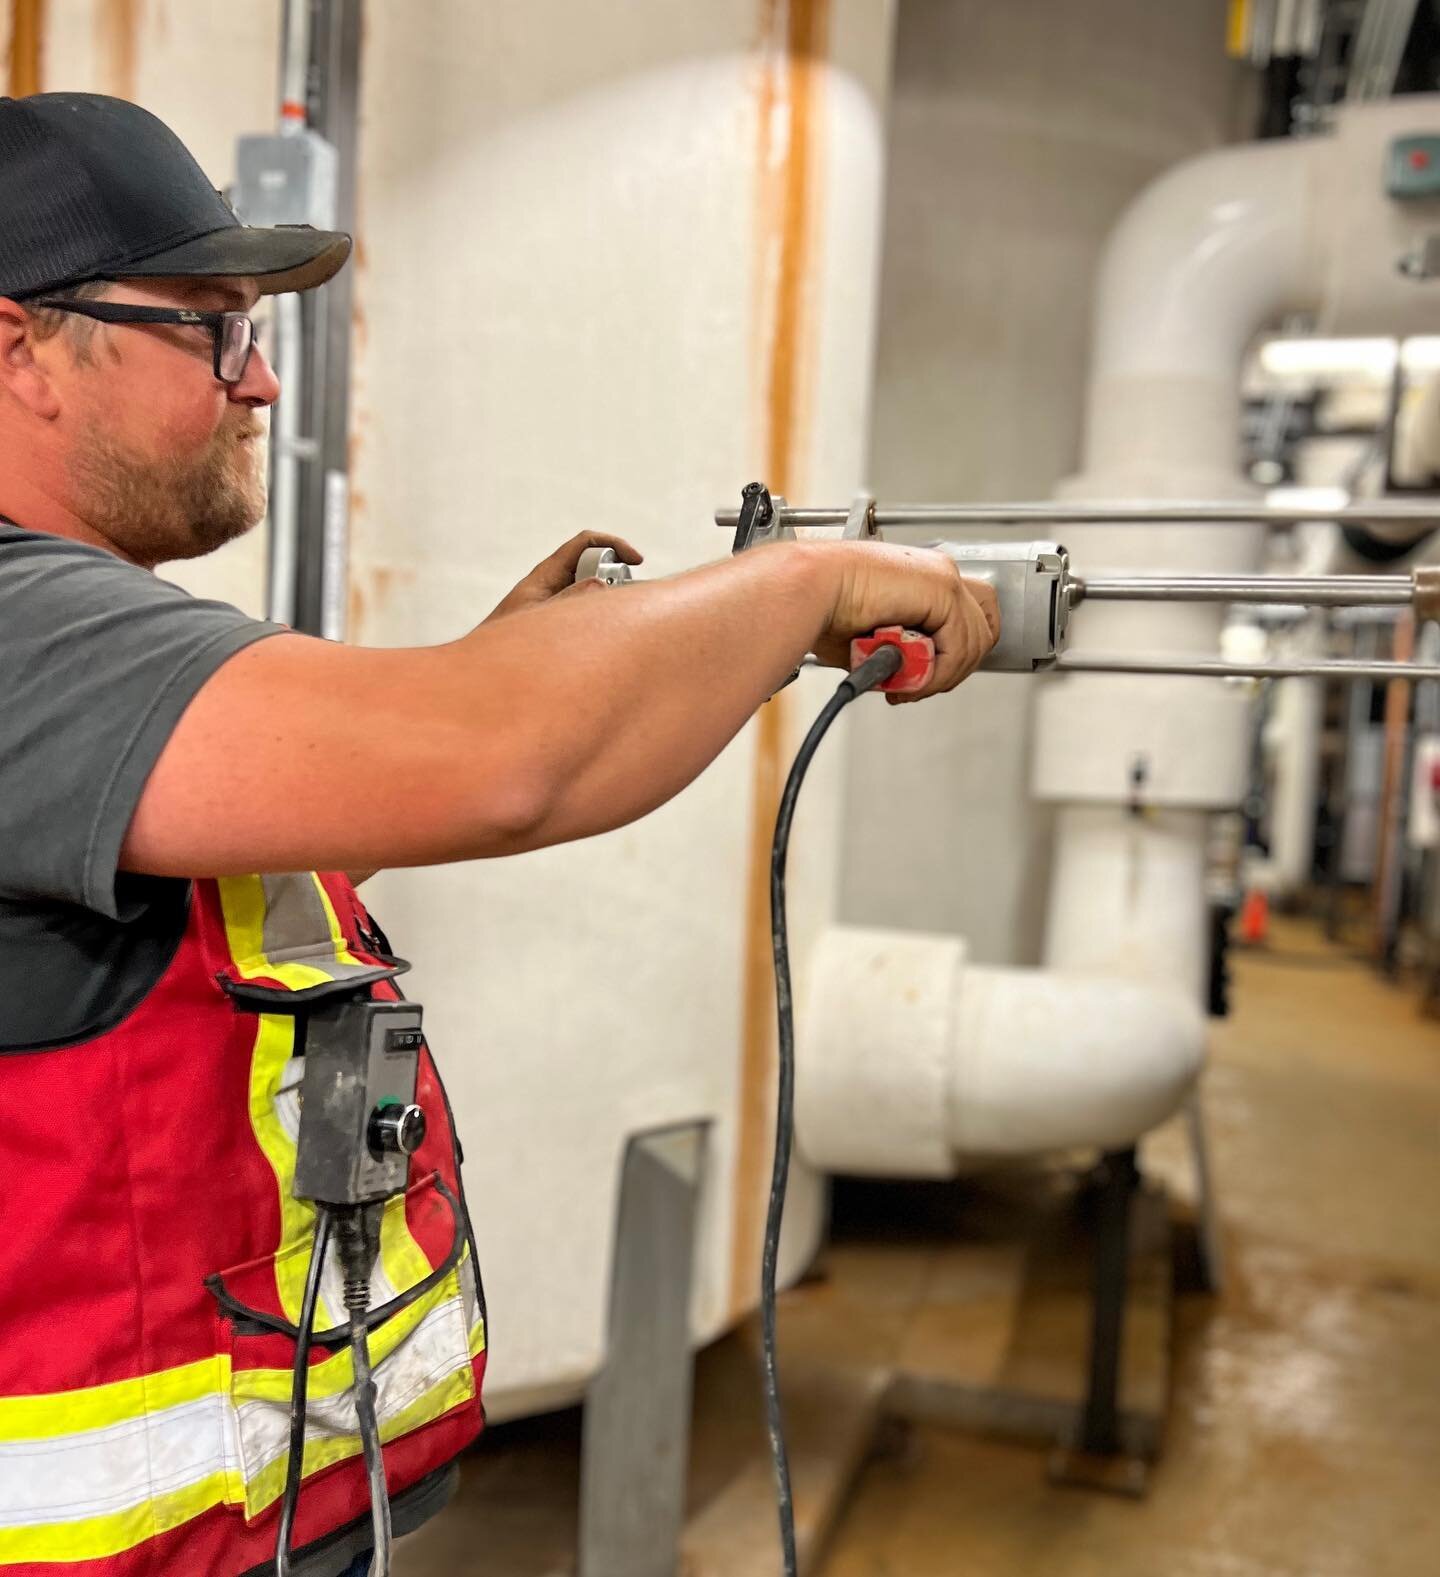 Another tap done for @trotterandmorton at the @fly_yyc airport! Our experts are hard at work in this beautiful Calgary weather ☀️

#hottapping #plumbing #construction #trucks #hydrant #fyp #yyc #alberta #f4f #work #britishcolumbia #saskatchewan #hvac